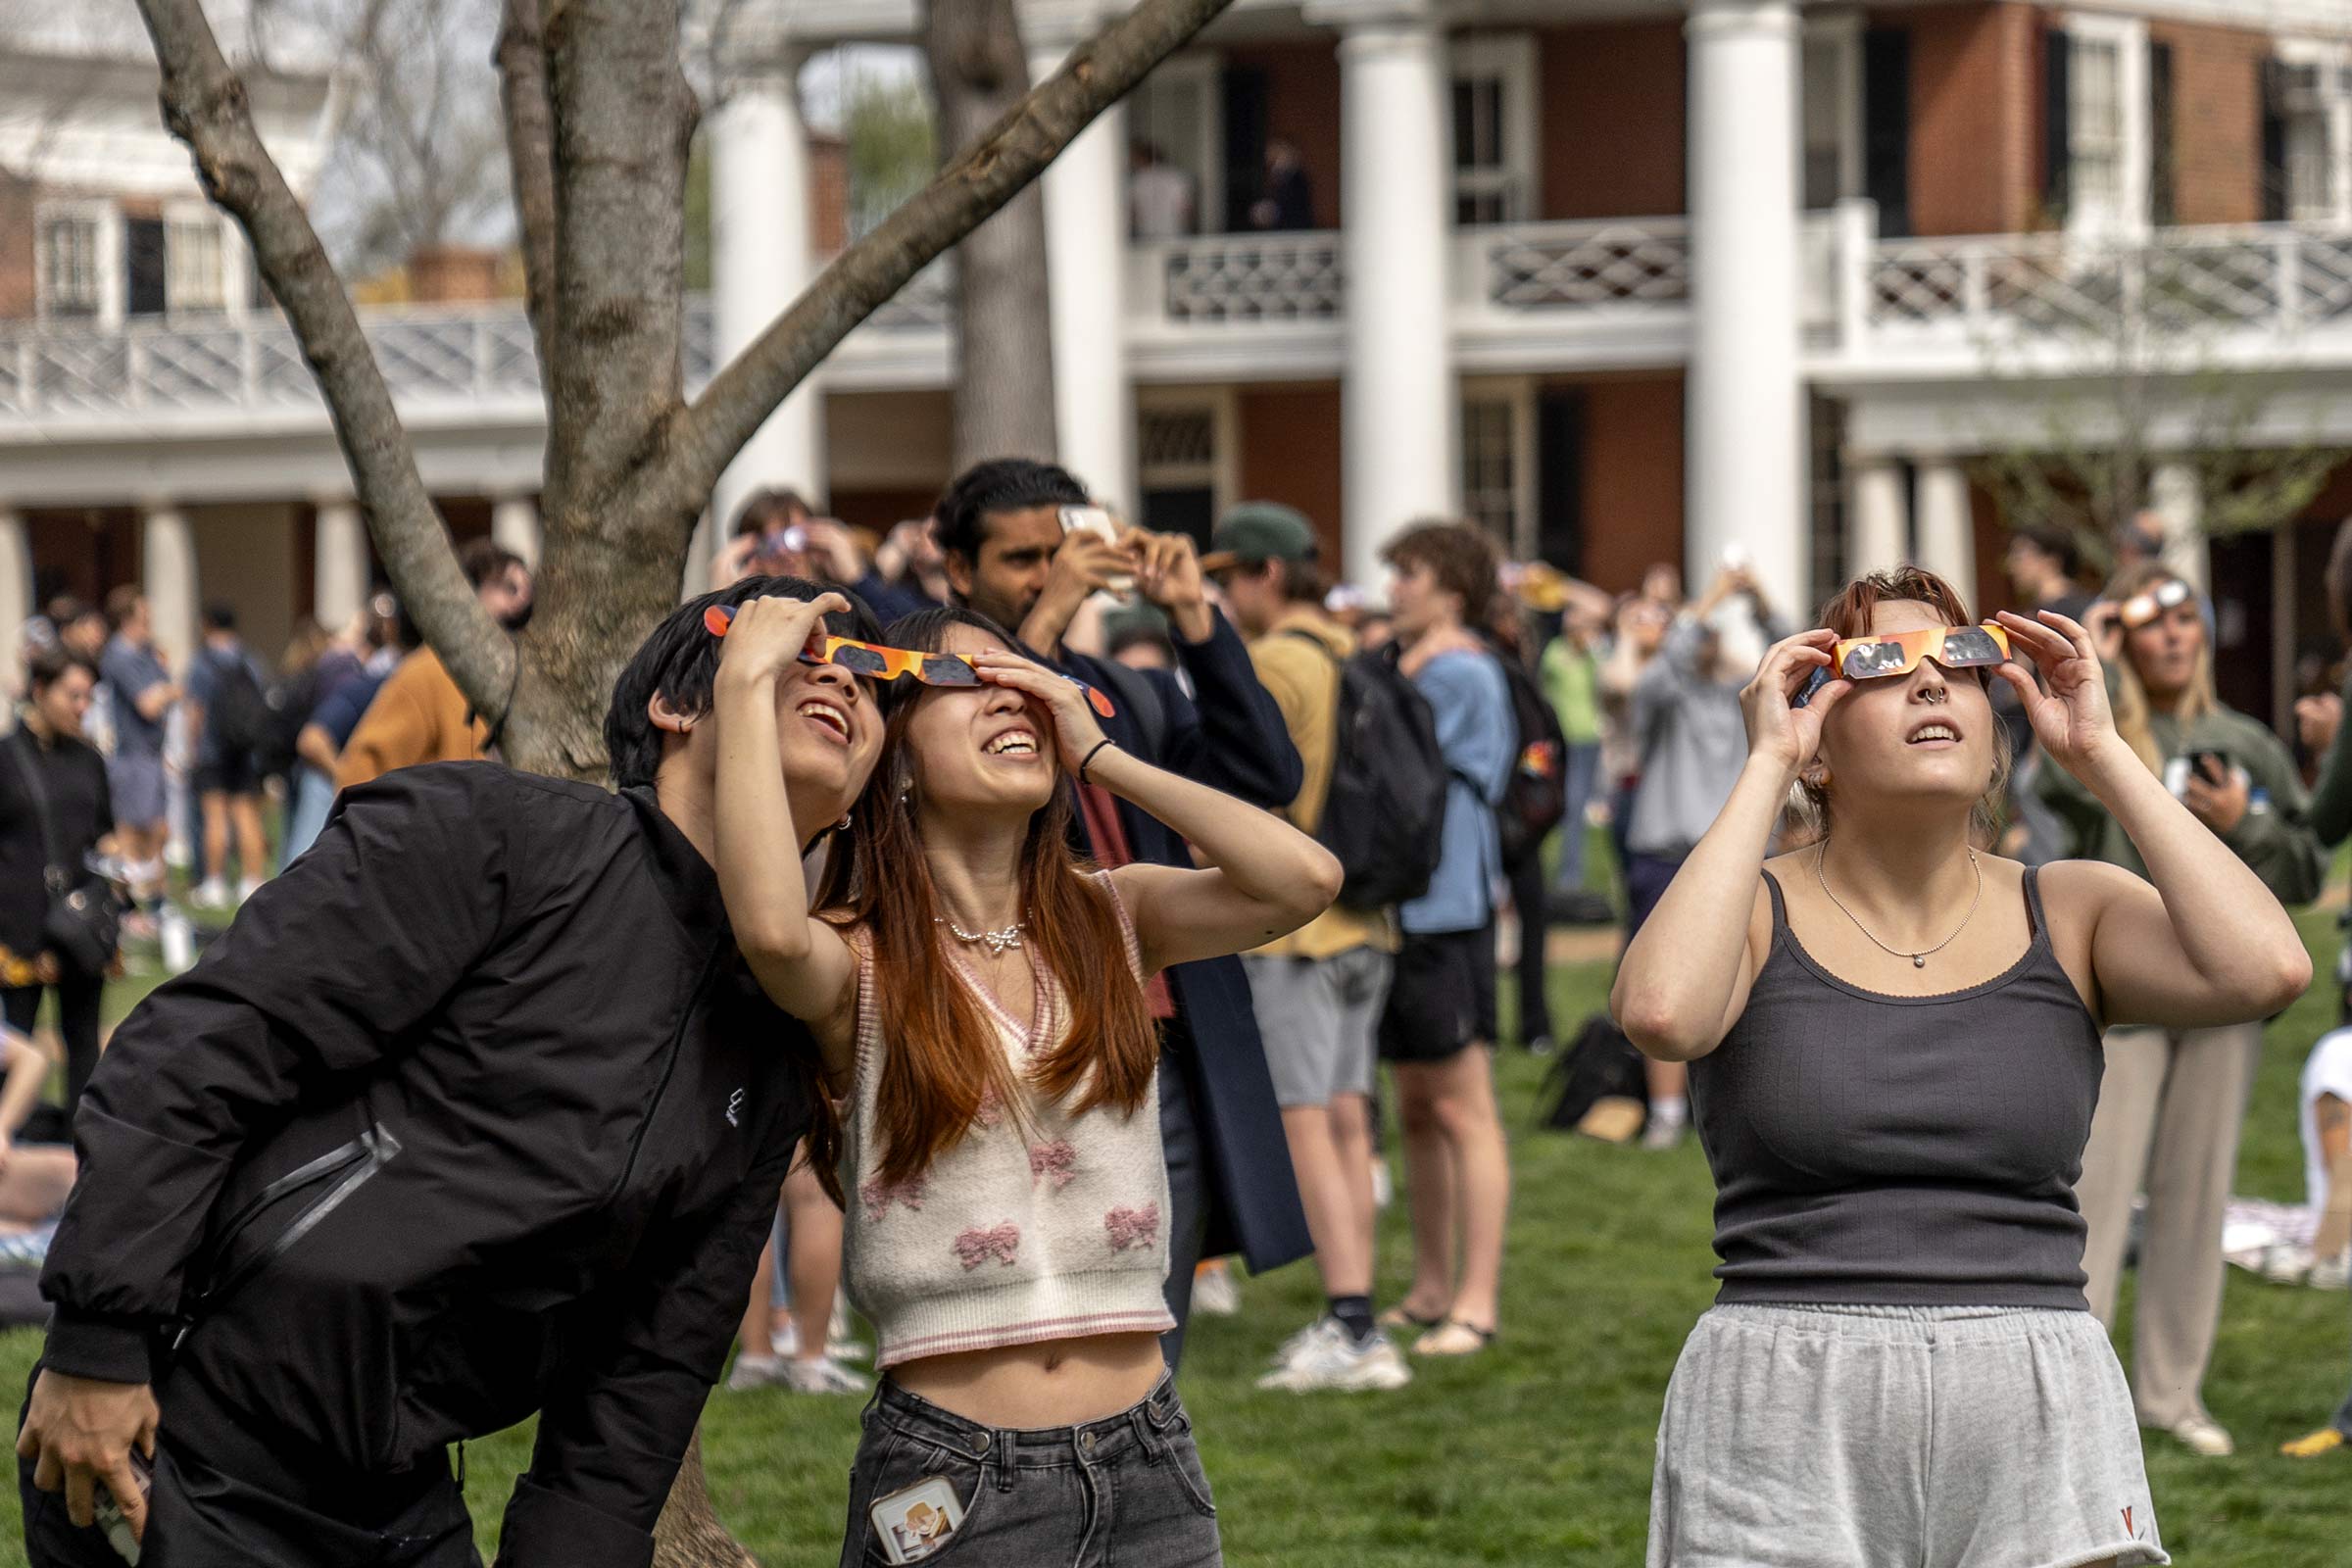 Two students share a pair of glasses and look through a side each at the same time